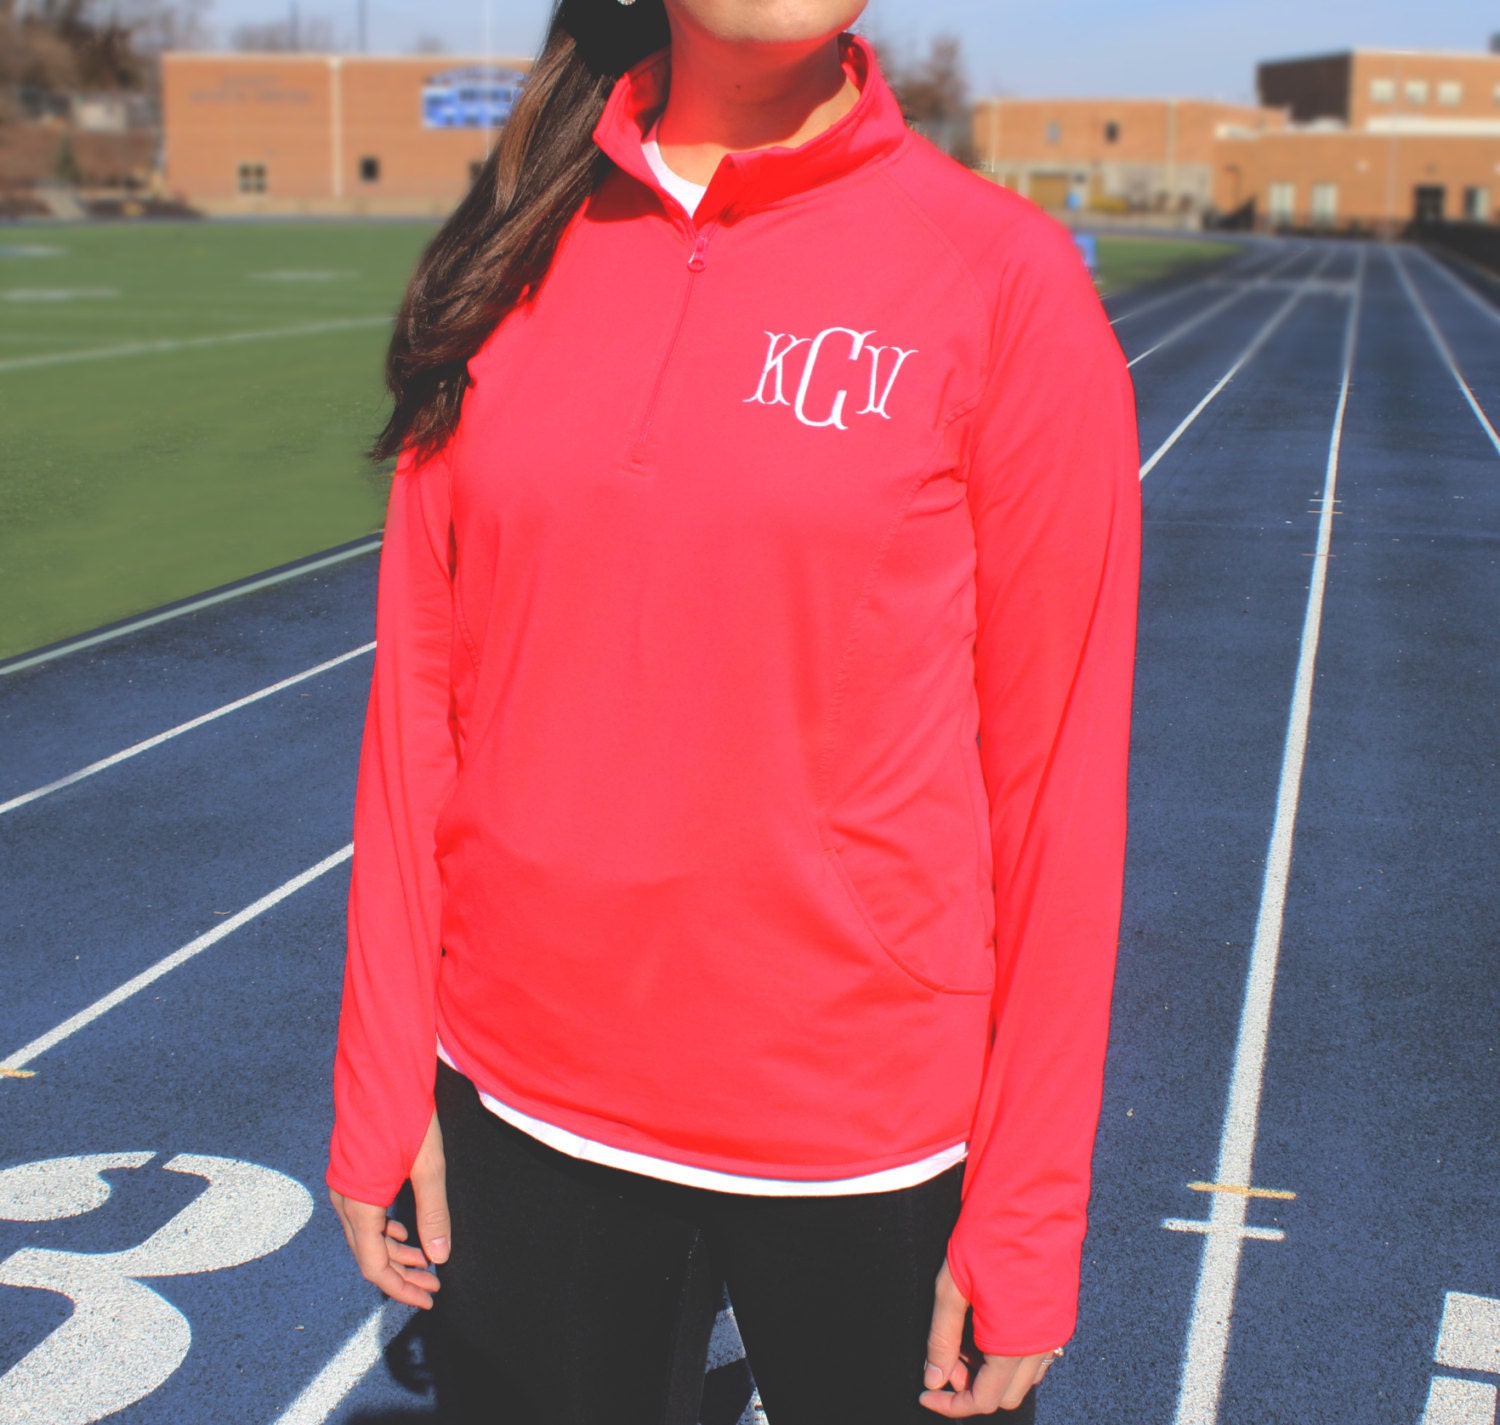 Monogram Athletic Quarter Zip Pullover Jacket | Personalized Monogrammed 1/2 Zip Athletic Dri-Fit Lightweight Pullover